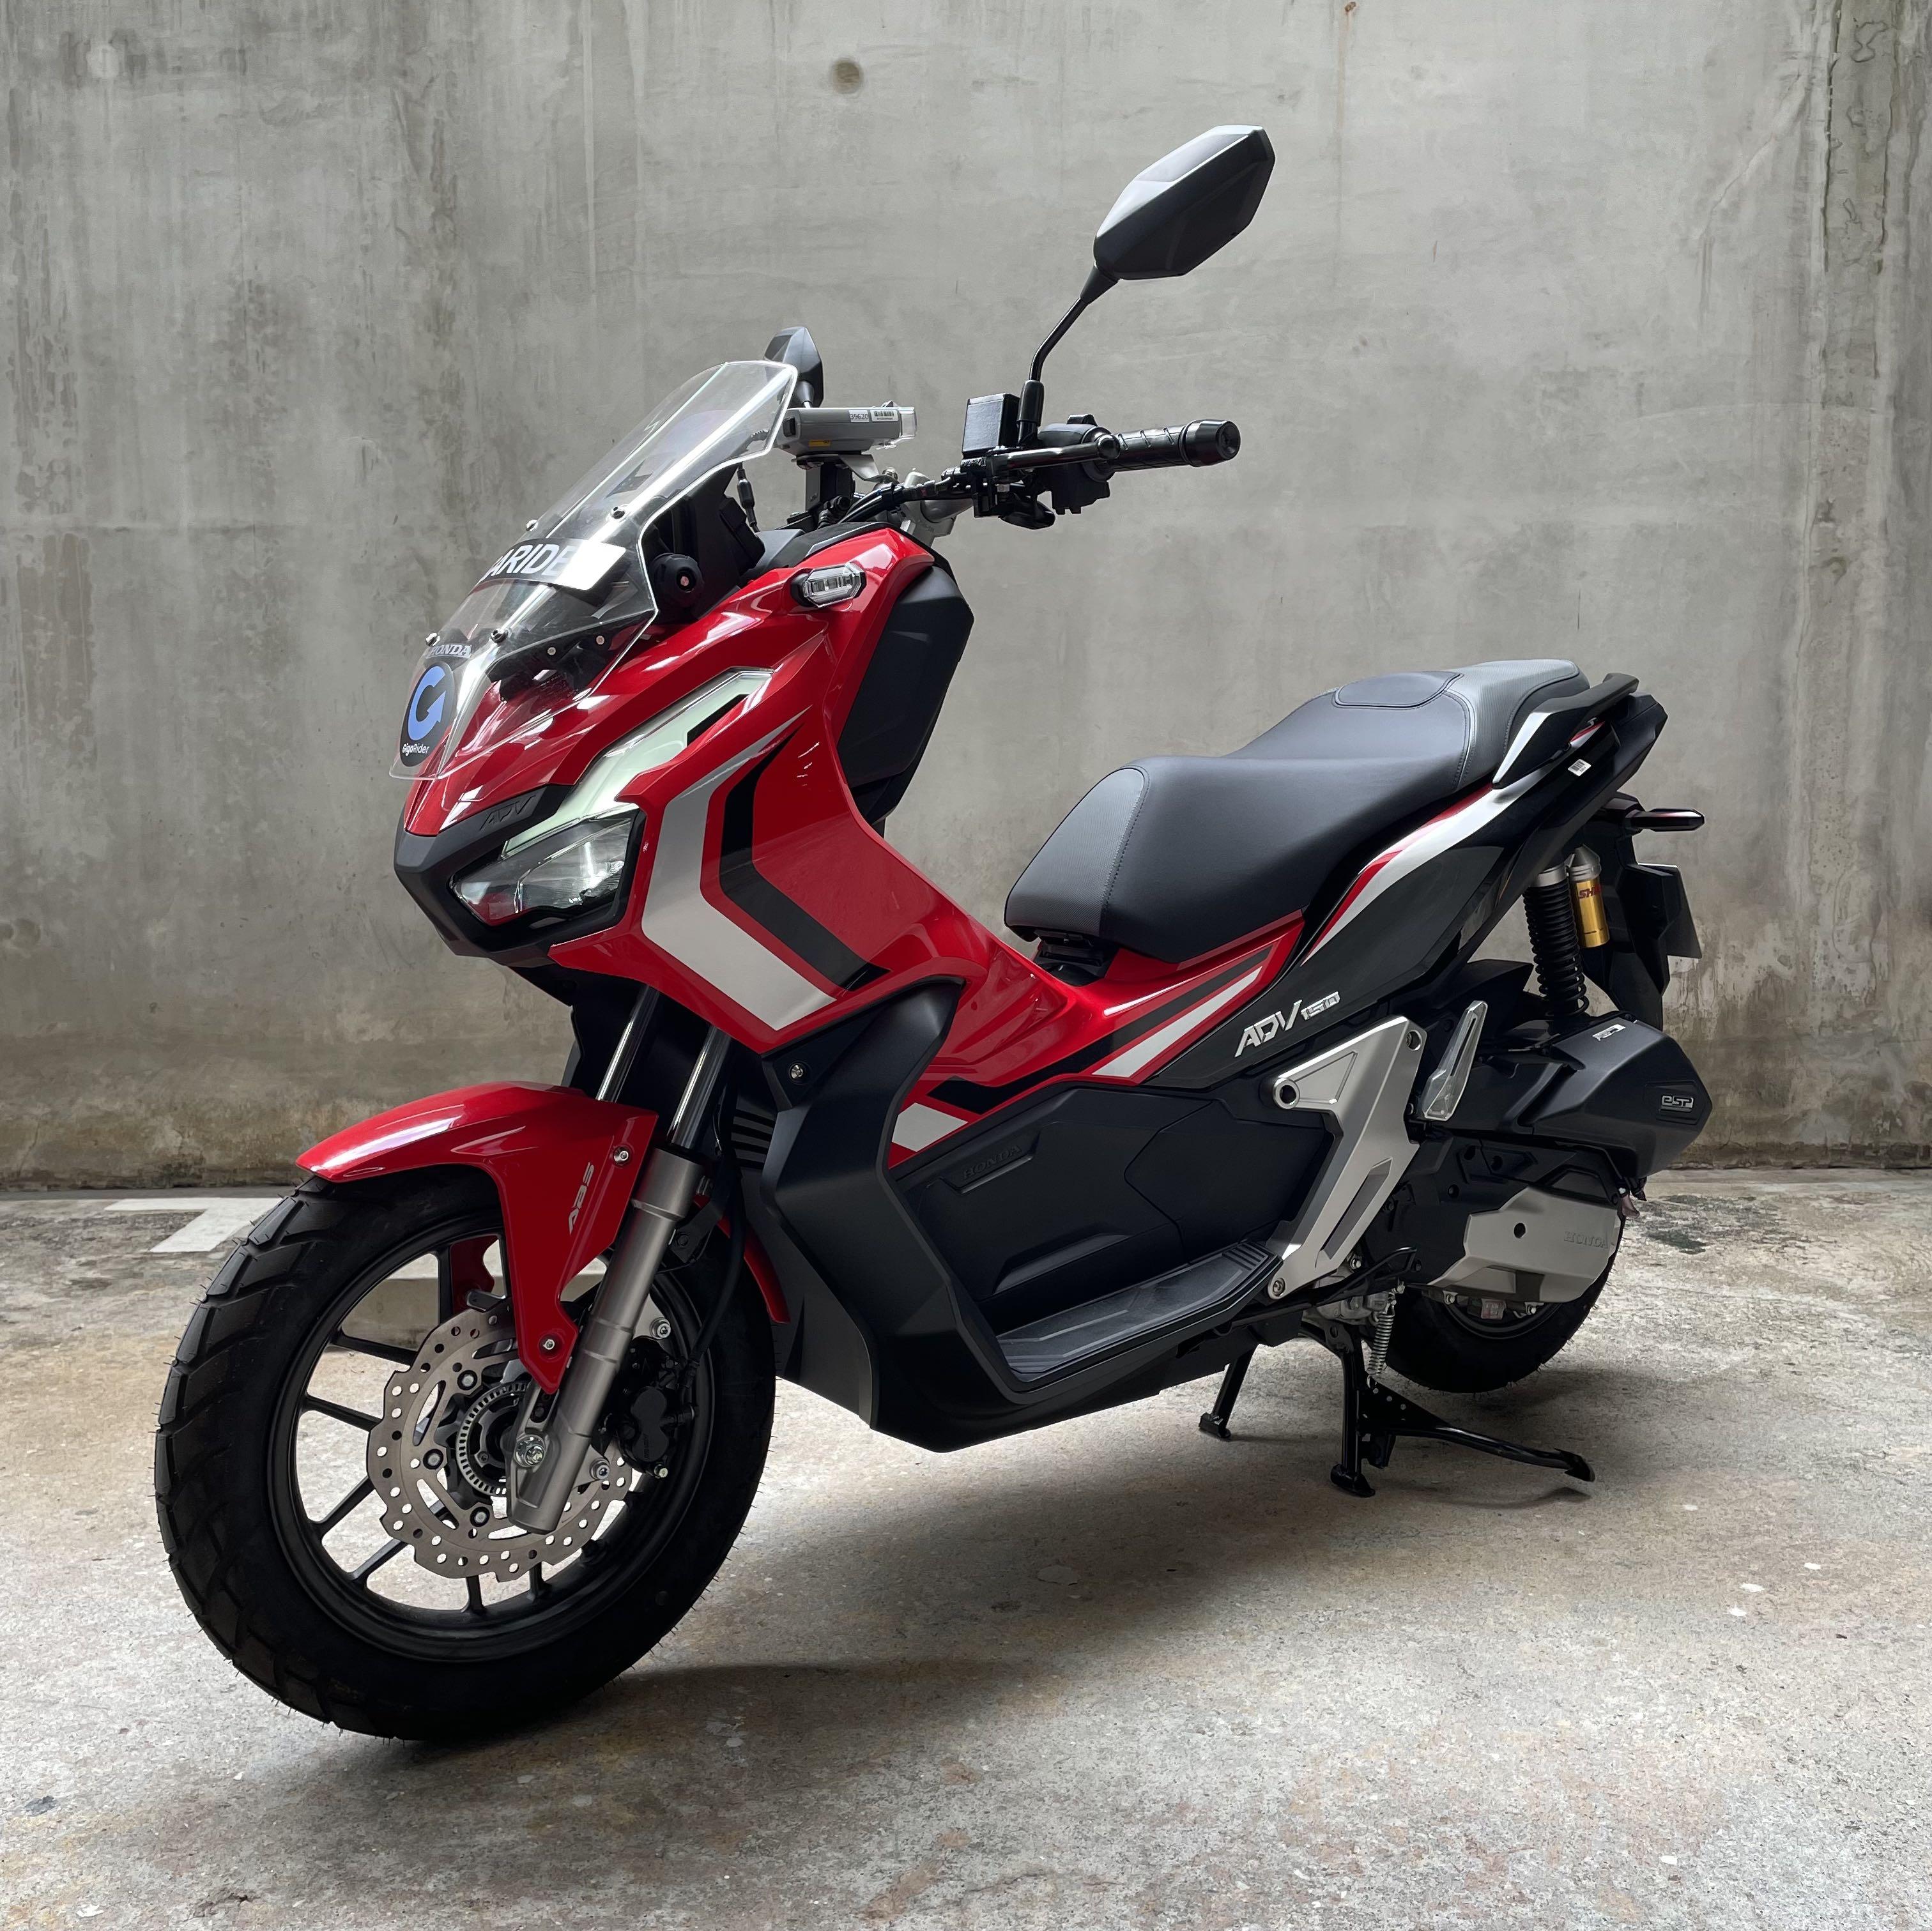 Rent Brand New Adv 150 Motorcycles Motorcycle Rental On Carousell